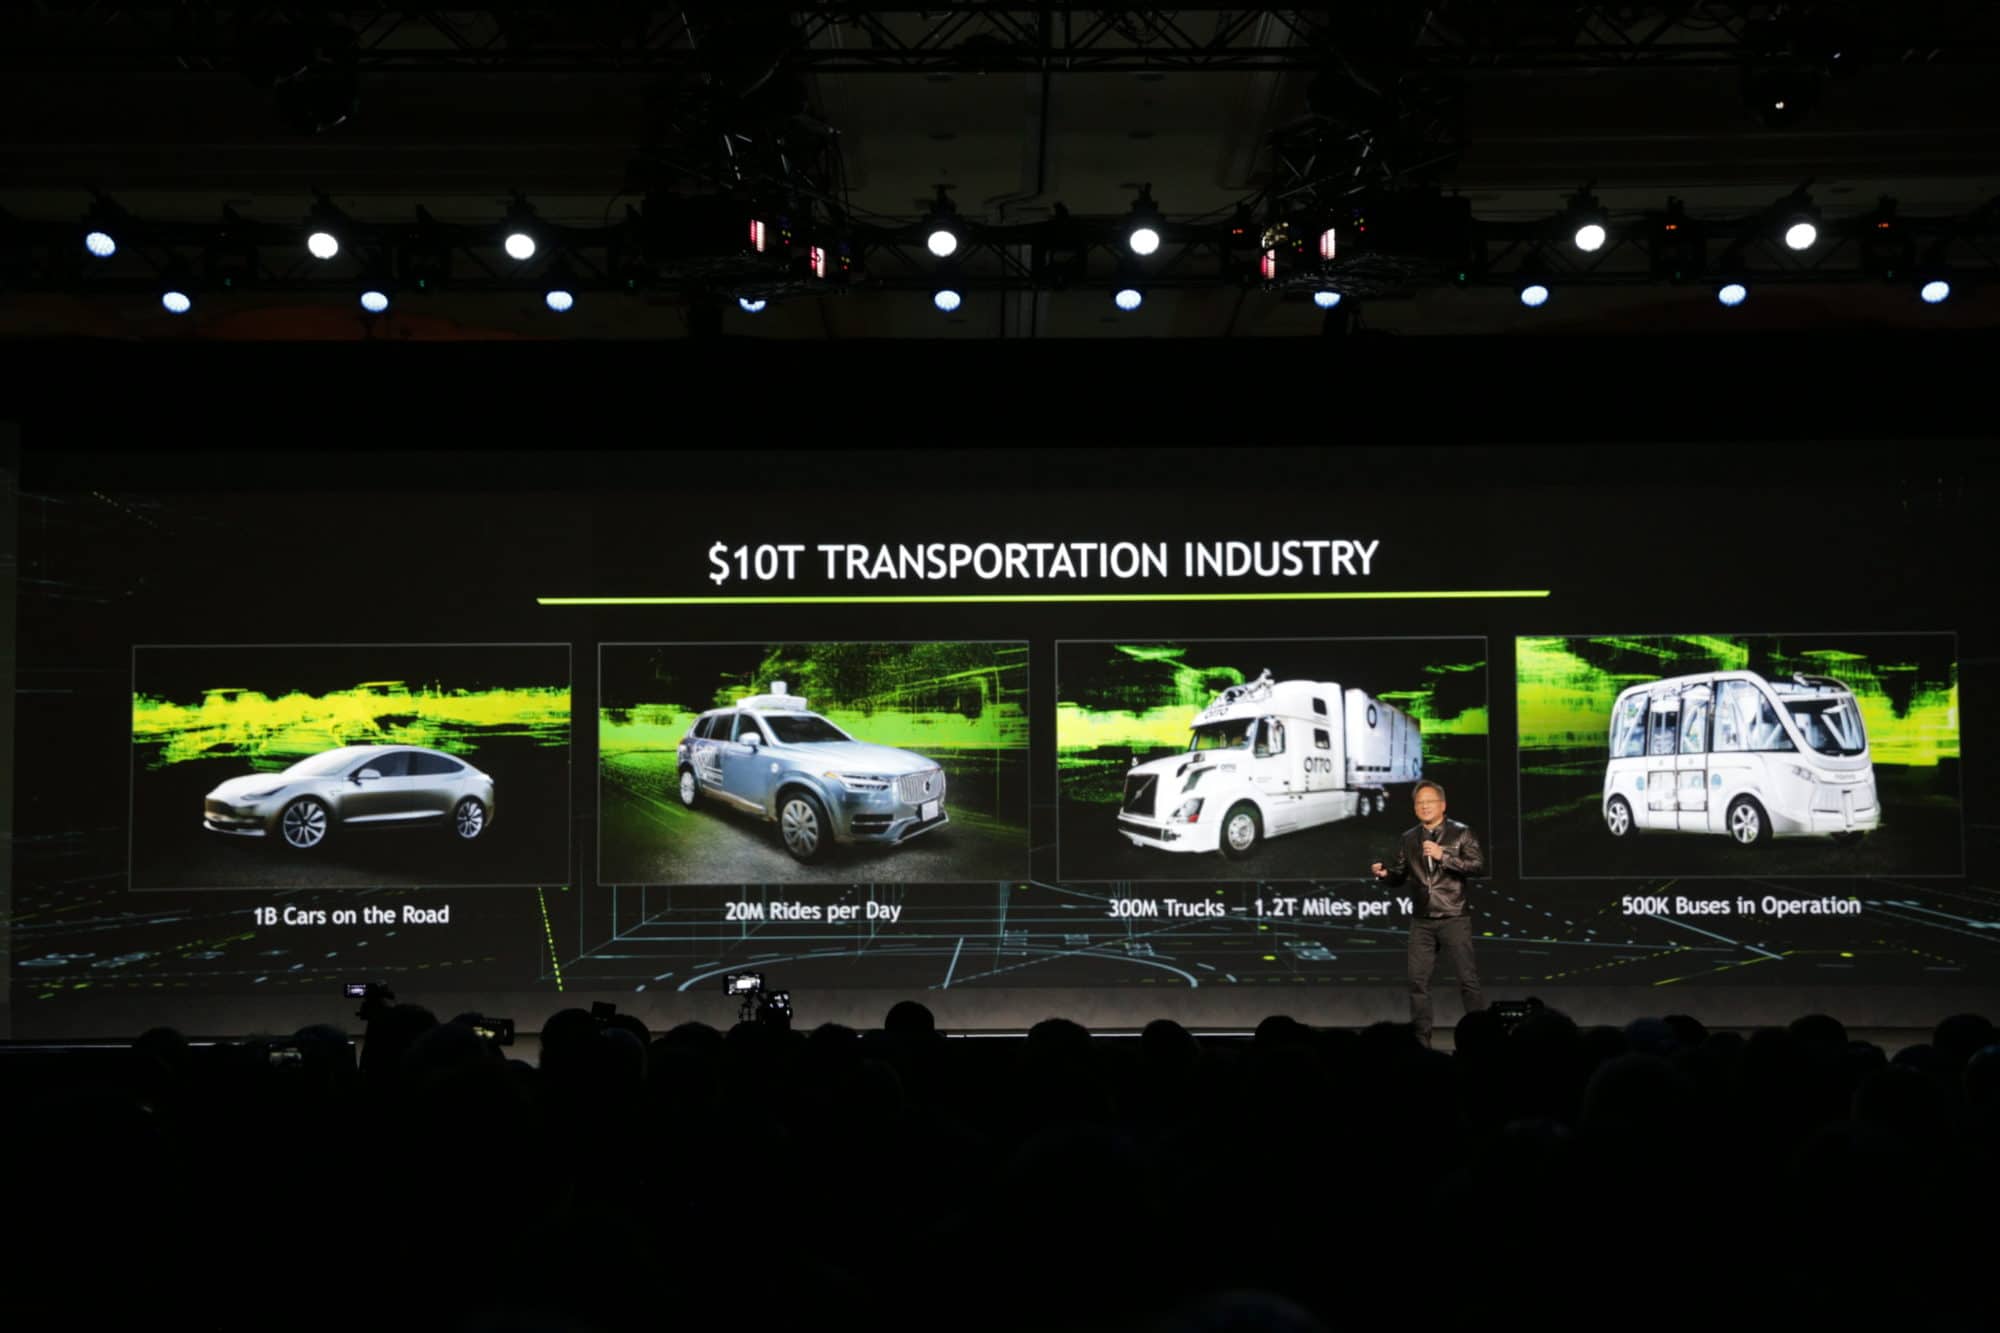 CES 2017 - Huang speaks about $10T Transportation Industry